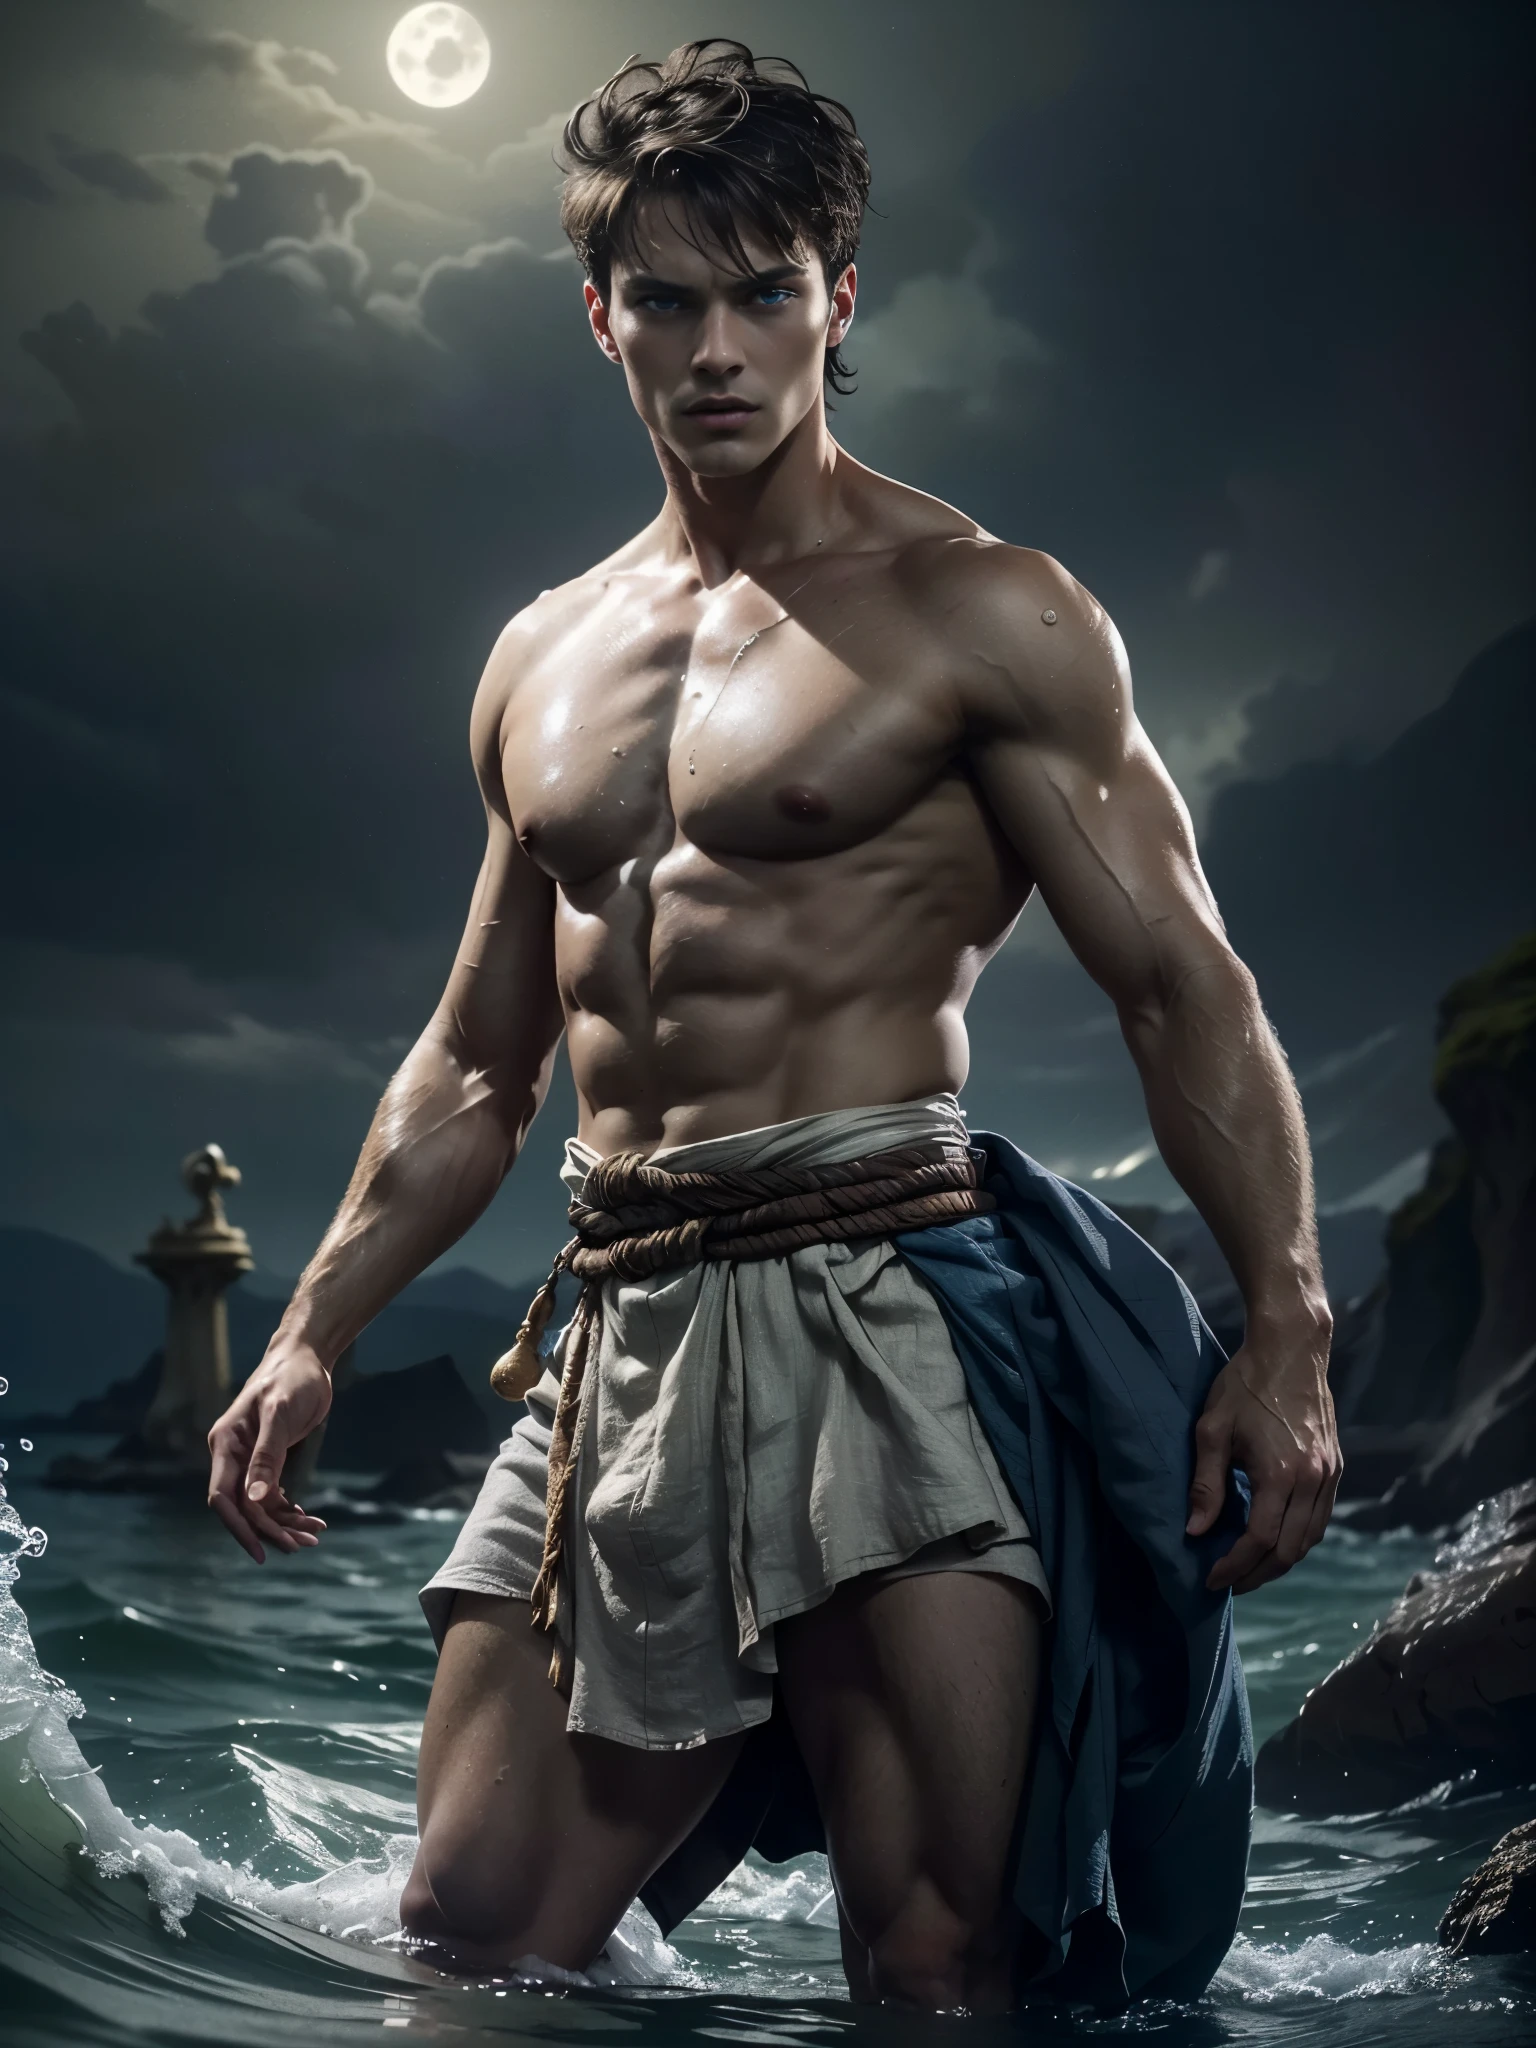 ((masterpiece)),((best quality)),8k, high detailed, ultra-detailed, Stylish Pose, real skin texture, dark cinematic lighting, 18-year-old italian male model, handsome, cute looking, divine look, powerful , (blue eyes:1.4), (god Poseidon:1.3), god of the seas, Neptune, godly, hydrokinesis, bending water, displaying the ability to manipulate water, creating massive waves and bend water:1.5), white pale skin, roman god physic, intense, (dry short hair:1.8), (dry short brown messy hair, strong jawline, masculine, muscular, defined fit body, hairless chest, shirtless, pantless, barechested, topples, barelegged, open sea, (under the water:1.4), sinister aesthetic, black storm clouds, lightning clouds, deep blue ocean waves, (night dark storm:1.6), barelegged, barefoot, antique cloth, antique linen spartan skirt, (sexy low-rise loincloth:1.6) (sexy, linen antique draped cloth:1.3),,,,,(dark background:1.5), dim light, dark atmosphere, cinematic lighting, Depth of field, award-winning photography, elegant, hyperrealistic, octane render, unreal, high definition, 8k resolution, highly detailed, 8k uhd, professional lighting, photon mapping, radiosity, physically-based rendering
